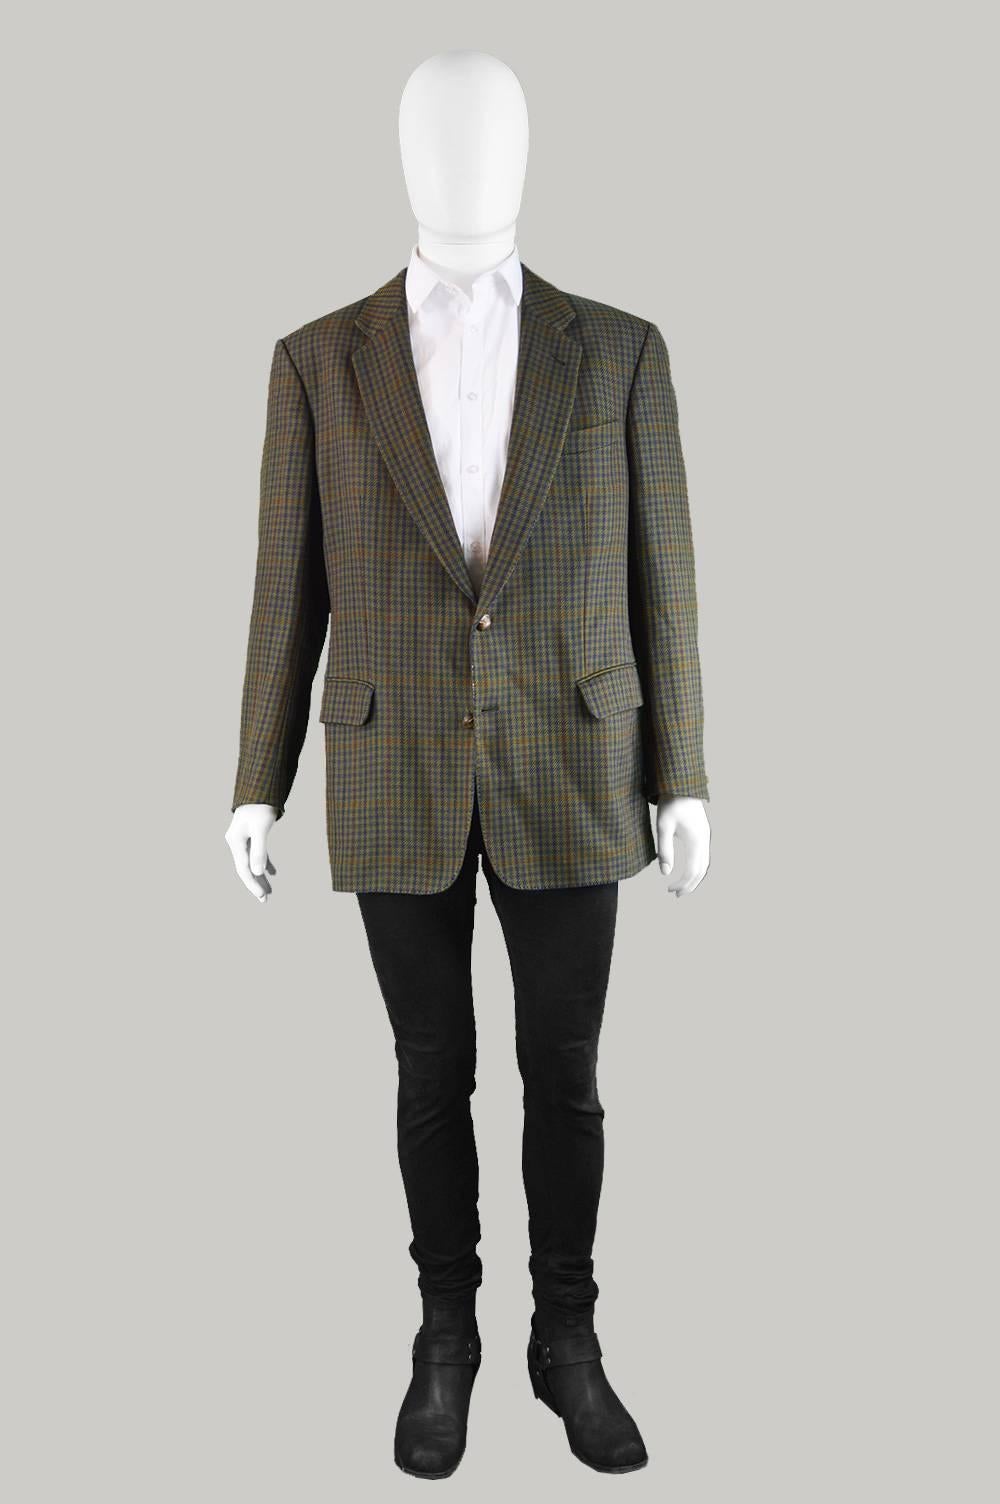 A vintage Men's plaid tweed mens blazer from c the. 1970s by British designer label, Burberry, when prior to 1998 they were known as 